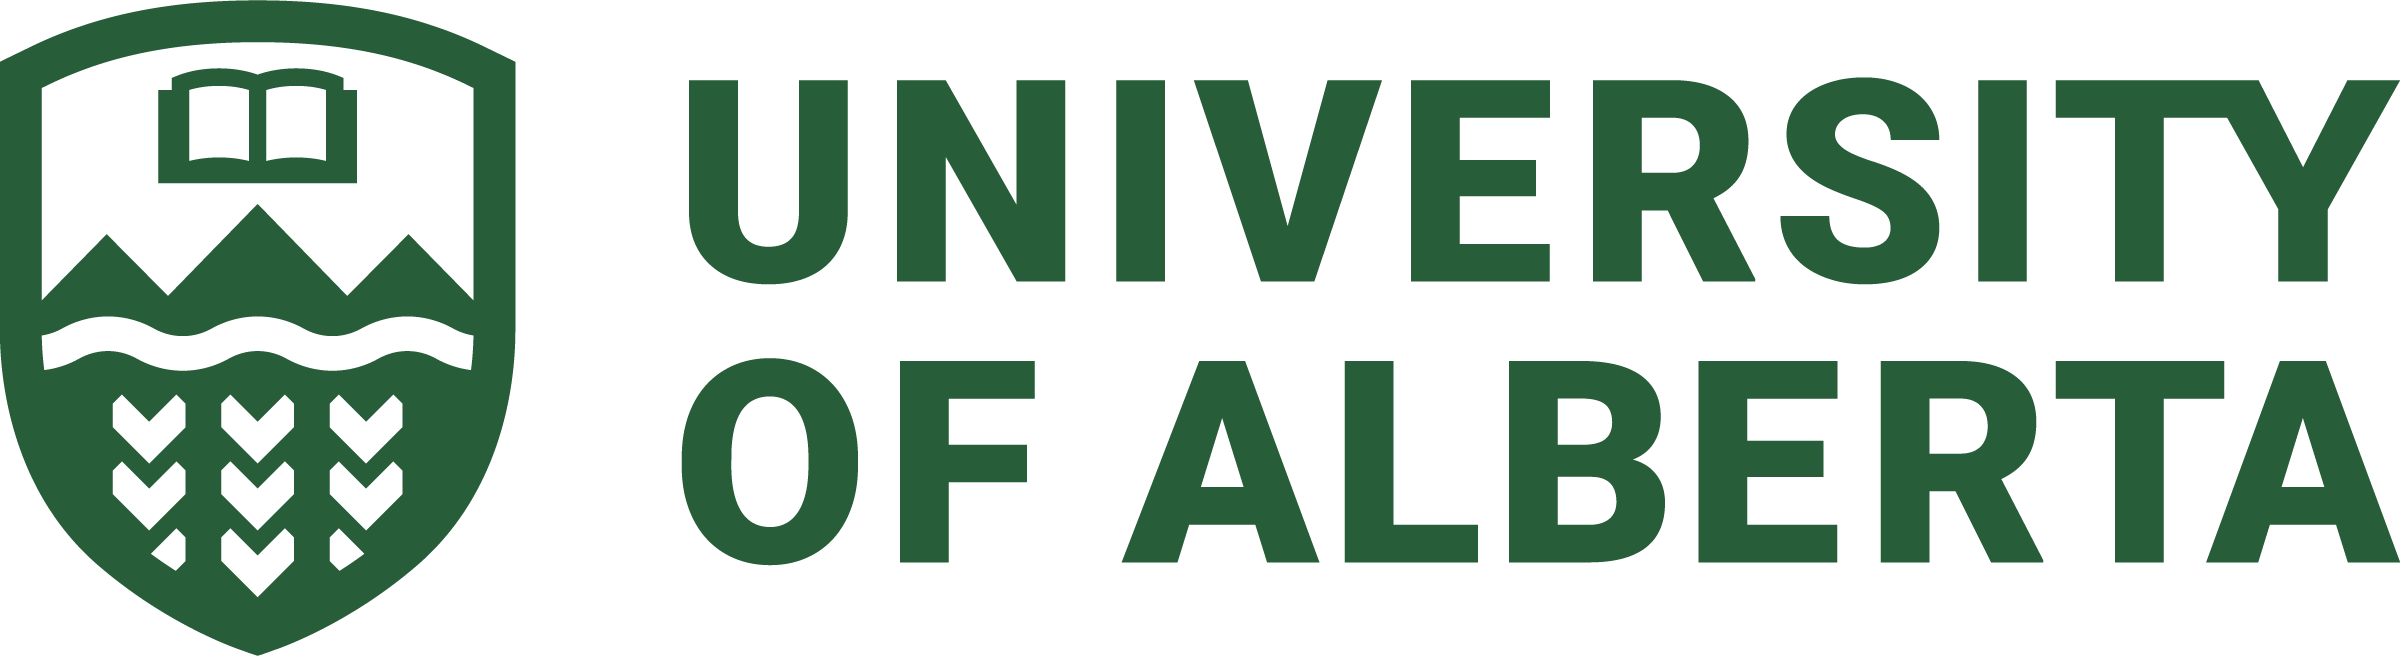 University of Alberta Contracts YuJa, Inc. for Comprehensive Lecture Capture and Video Streaming Solution